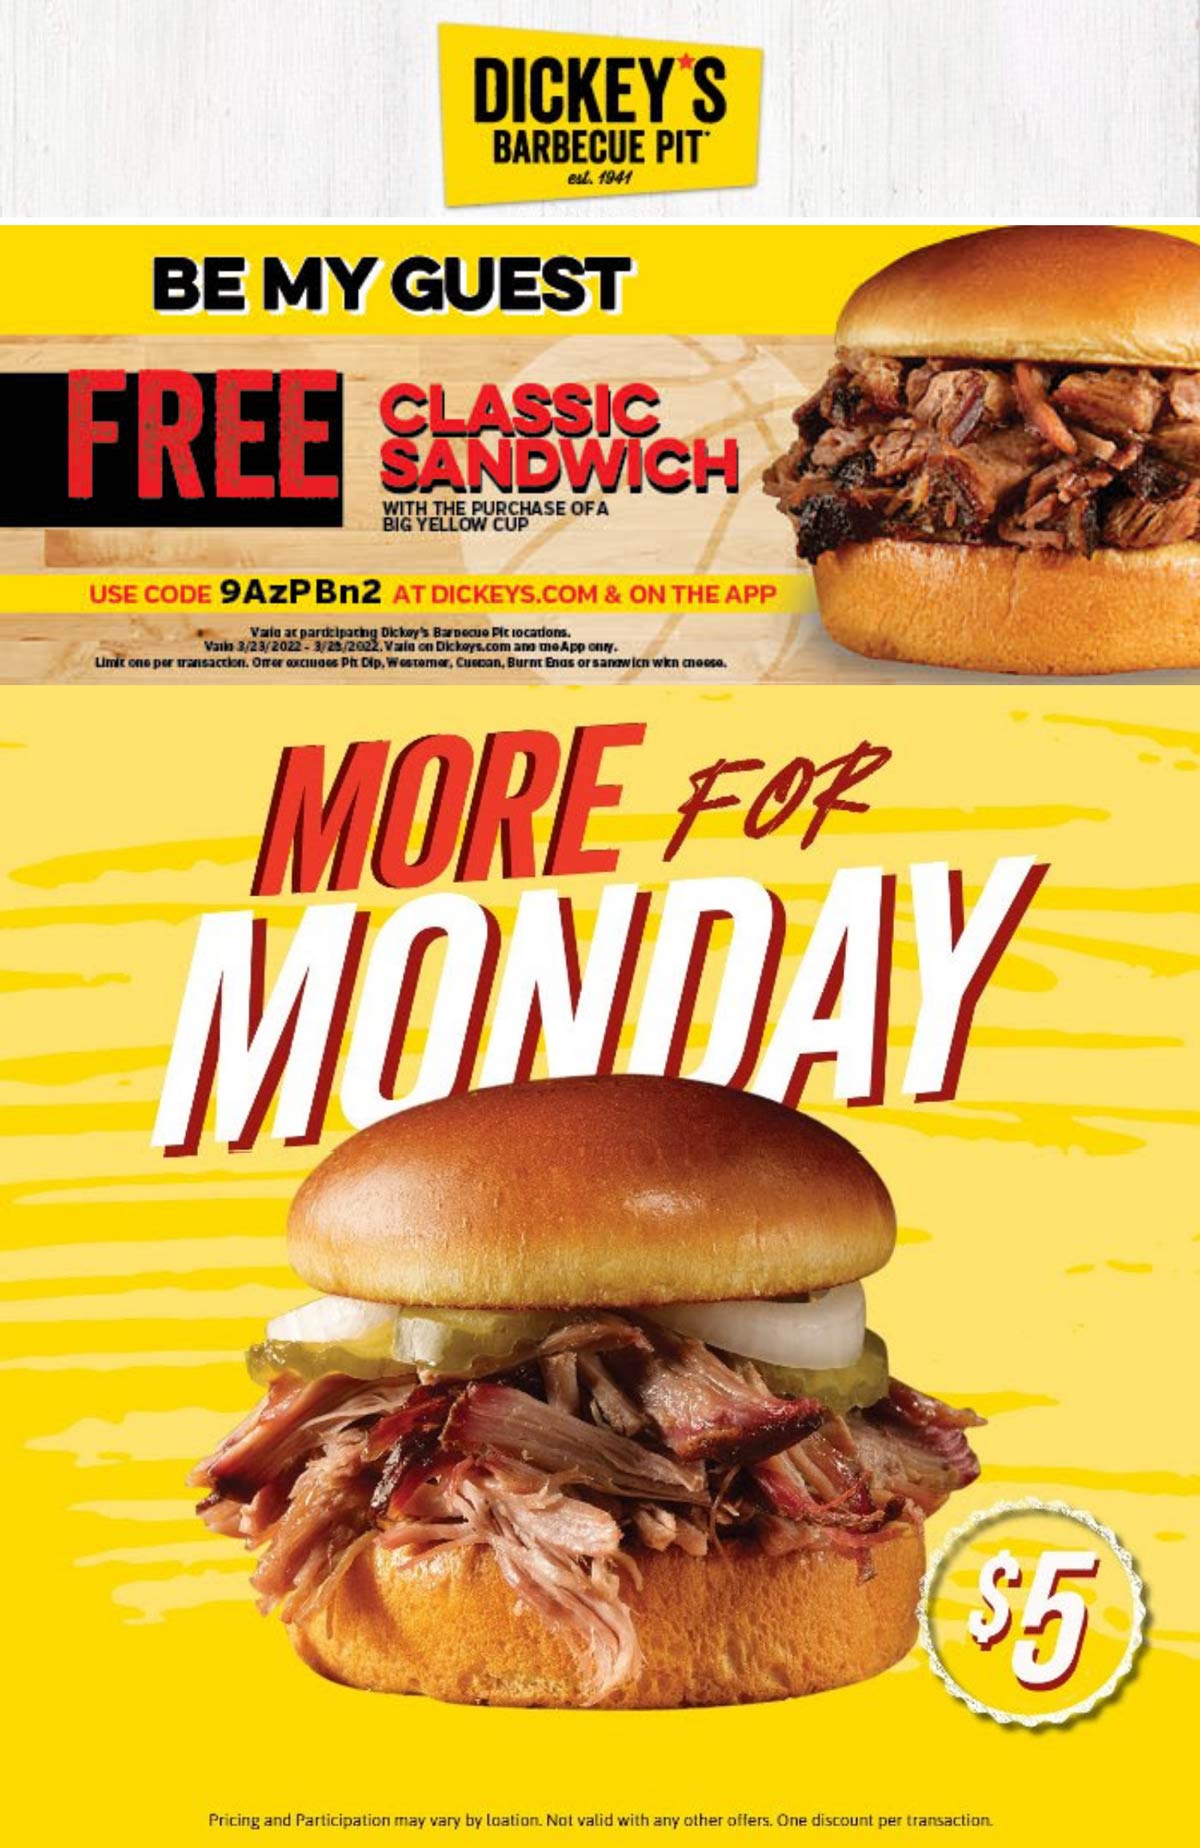 Dickeys Barbecue Pit restaurants Coupon  Free classic sandwich with your cup today at Dickeys Barbecue Pit via promo code 9AzPBn2 #dickeysbarbecuepit 